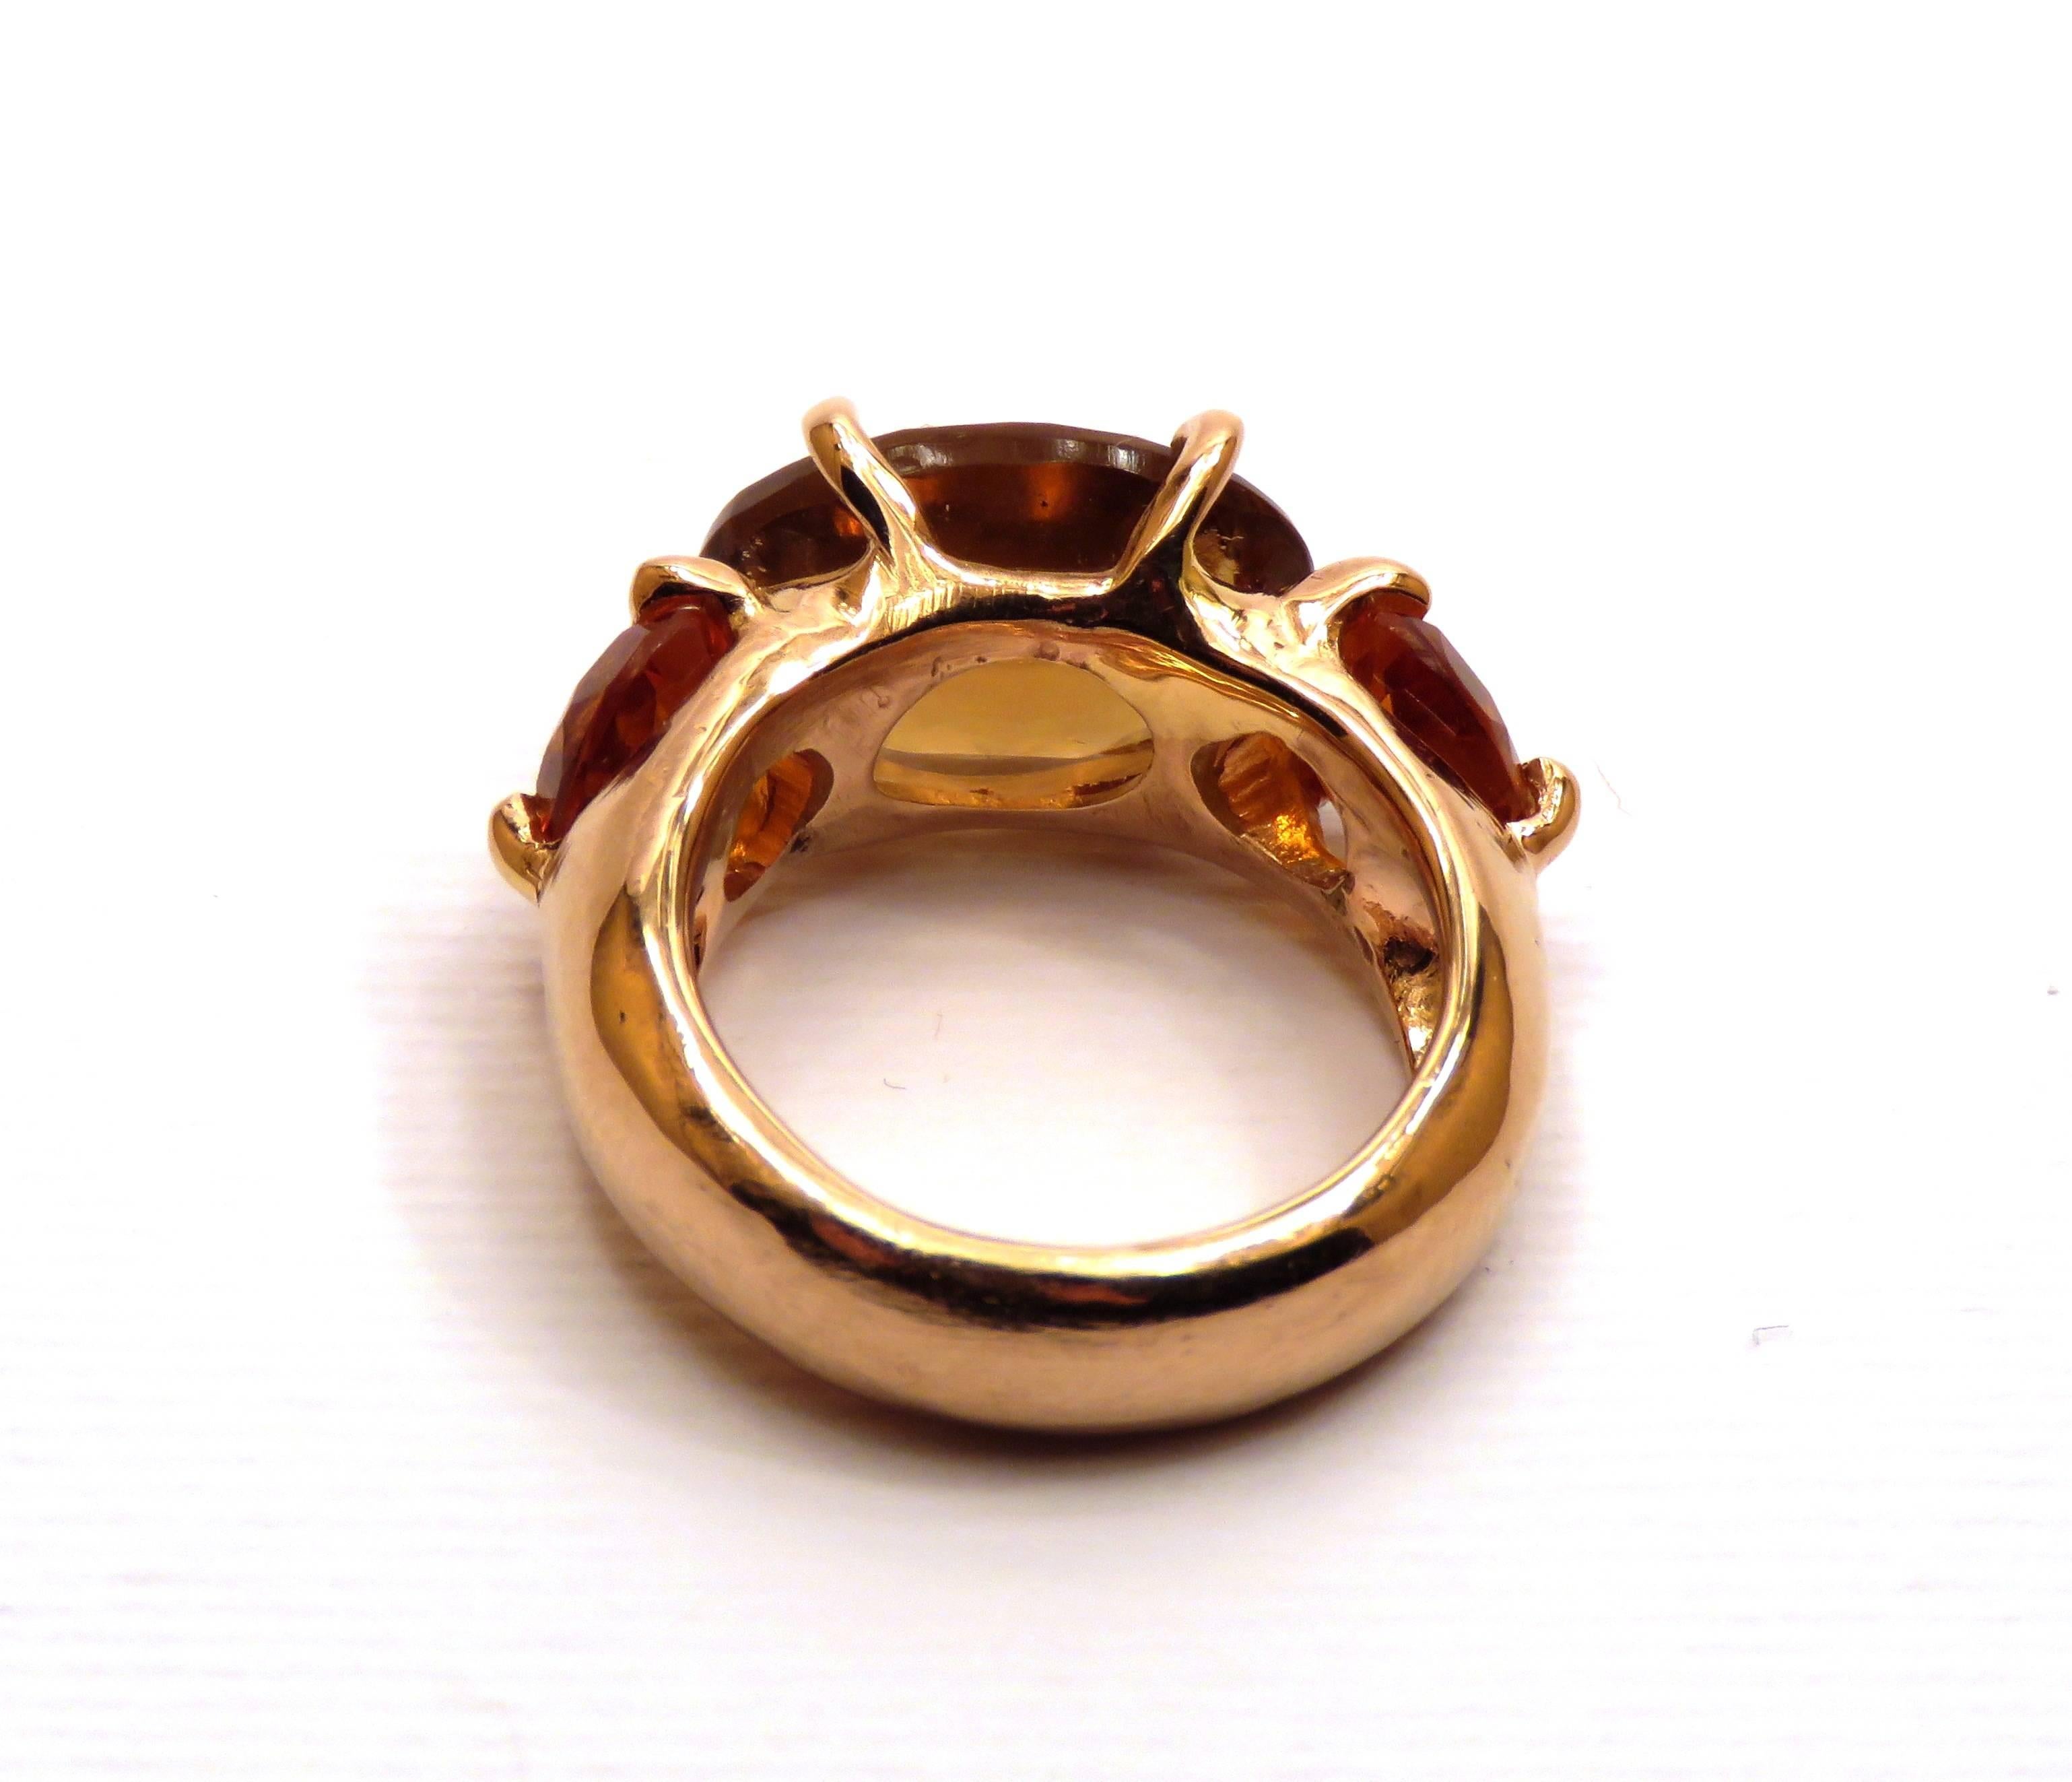 Modern Rose Gold Orange Citrine Ring Handcrafted in Italy by Botta gioielli